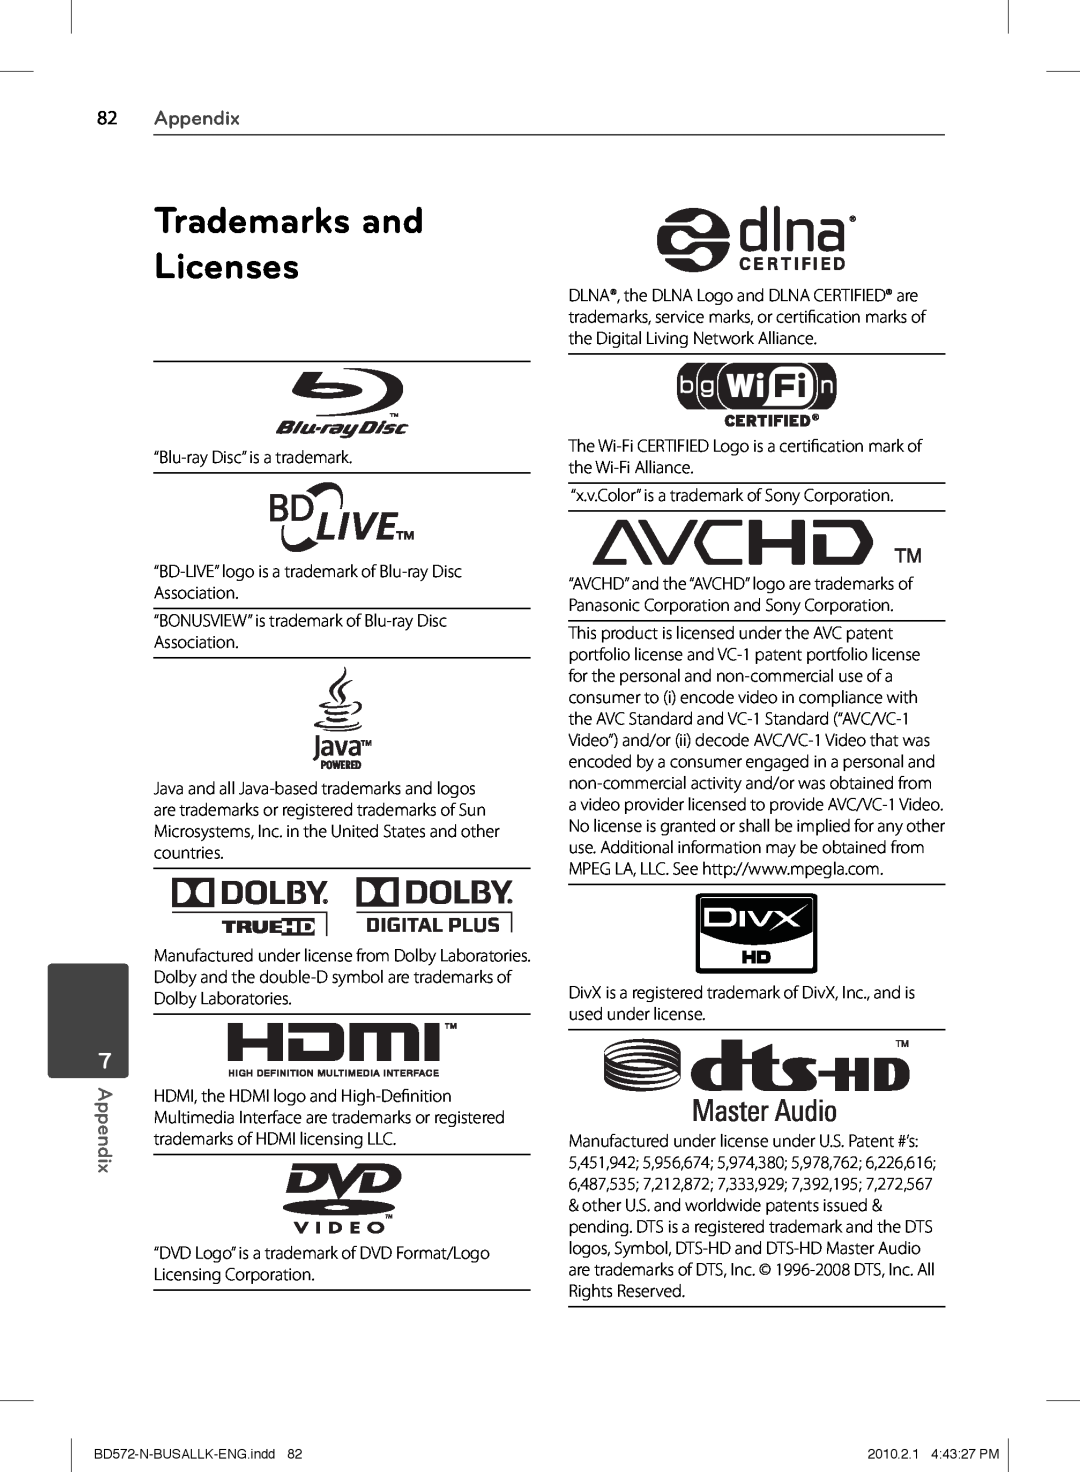 LG Electronics BD570 owner manual Trademarks and Licenses, Appendix 